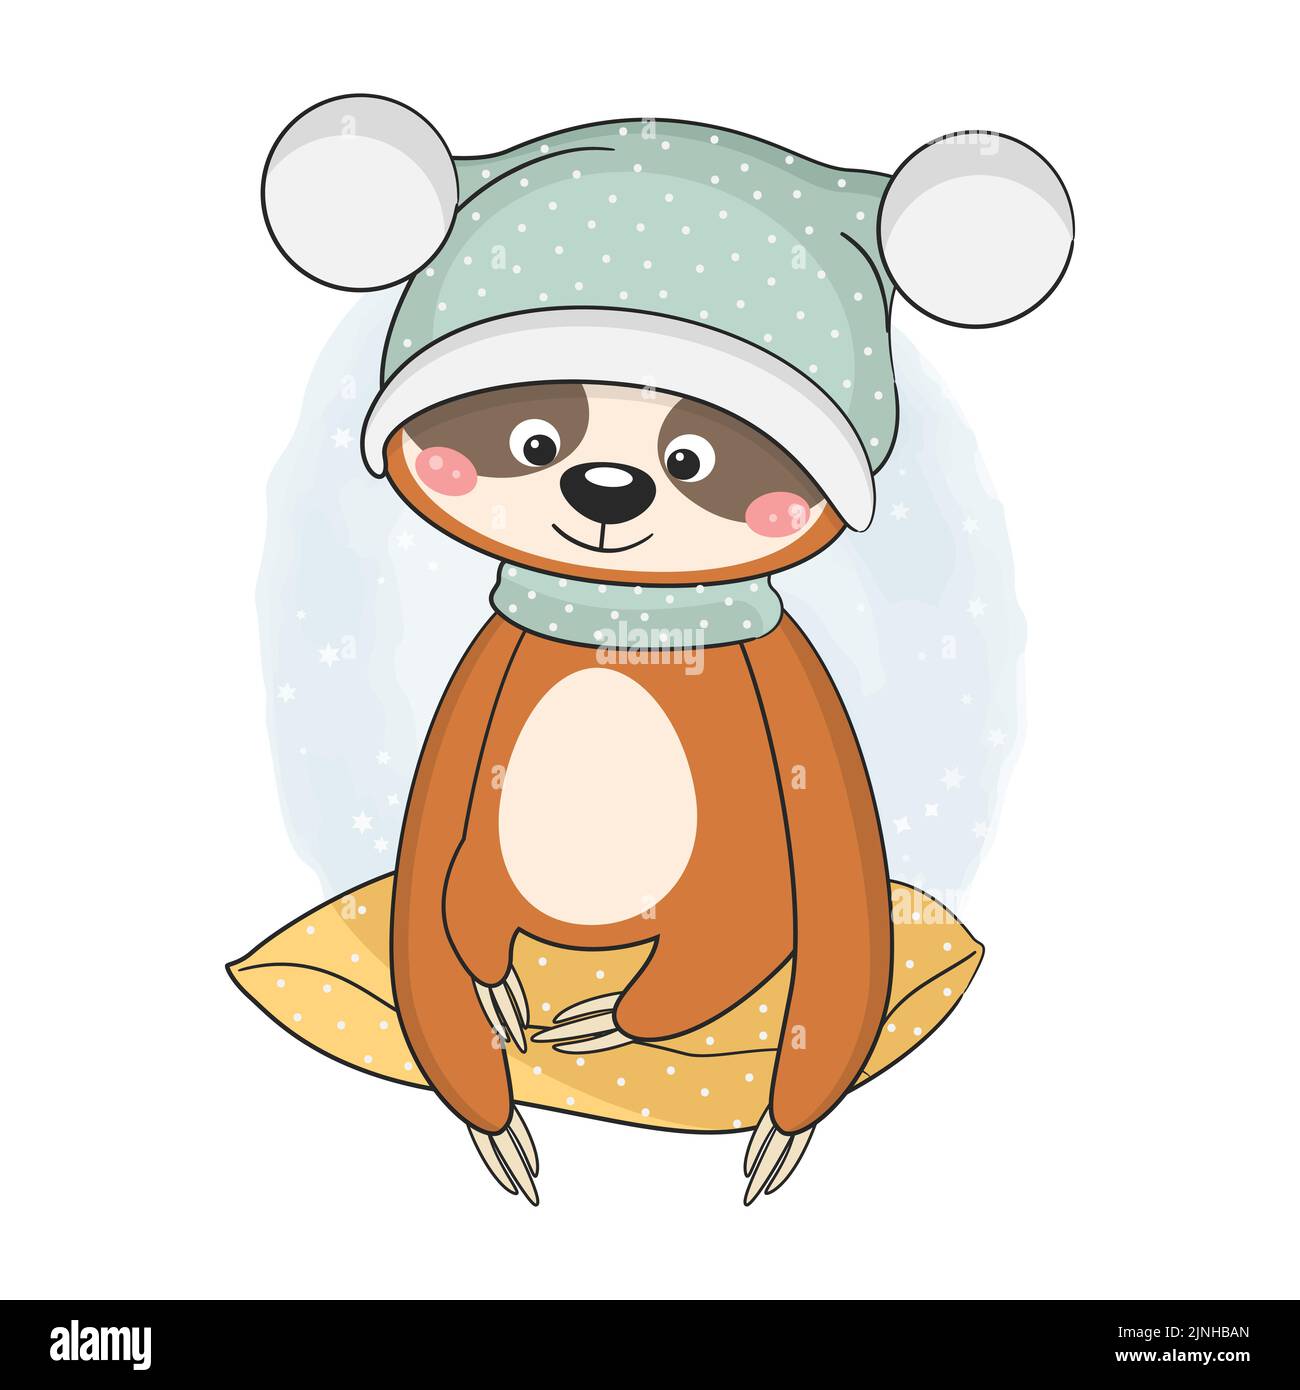 Cute baby sloth sitting on pillow. Stock Vector